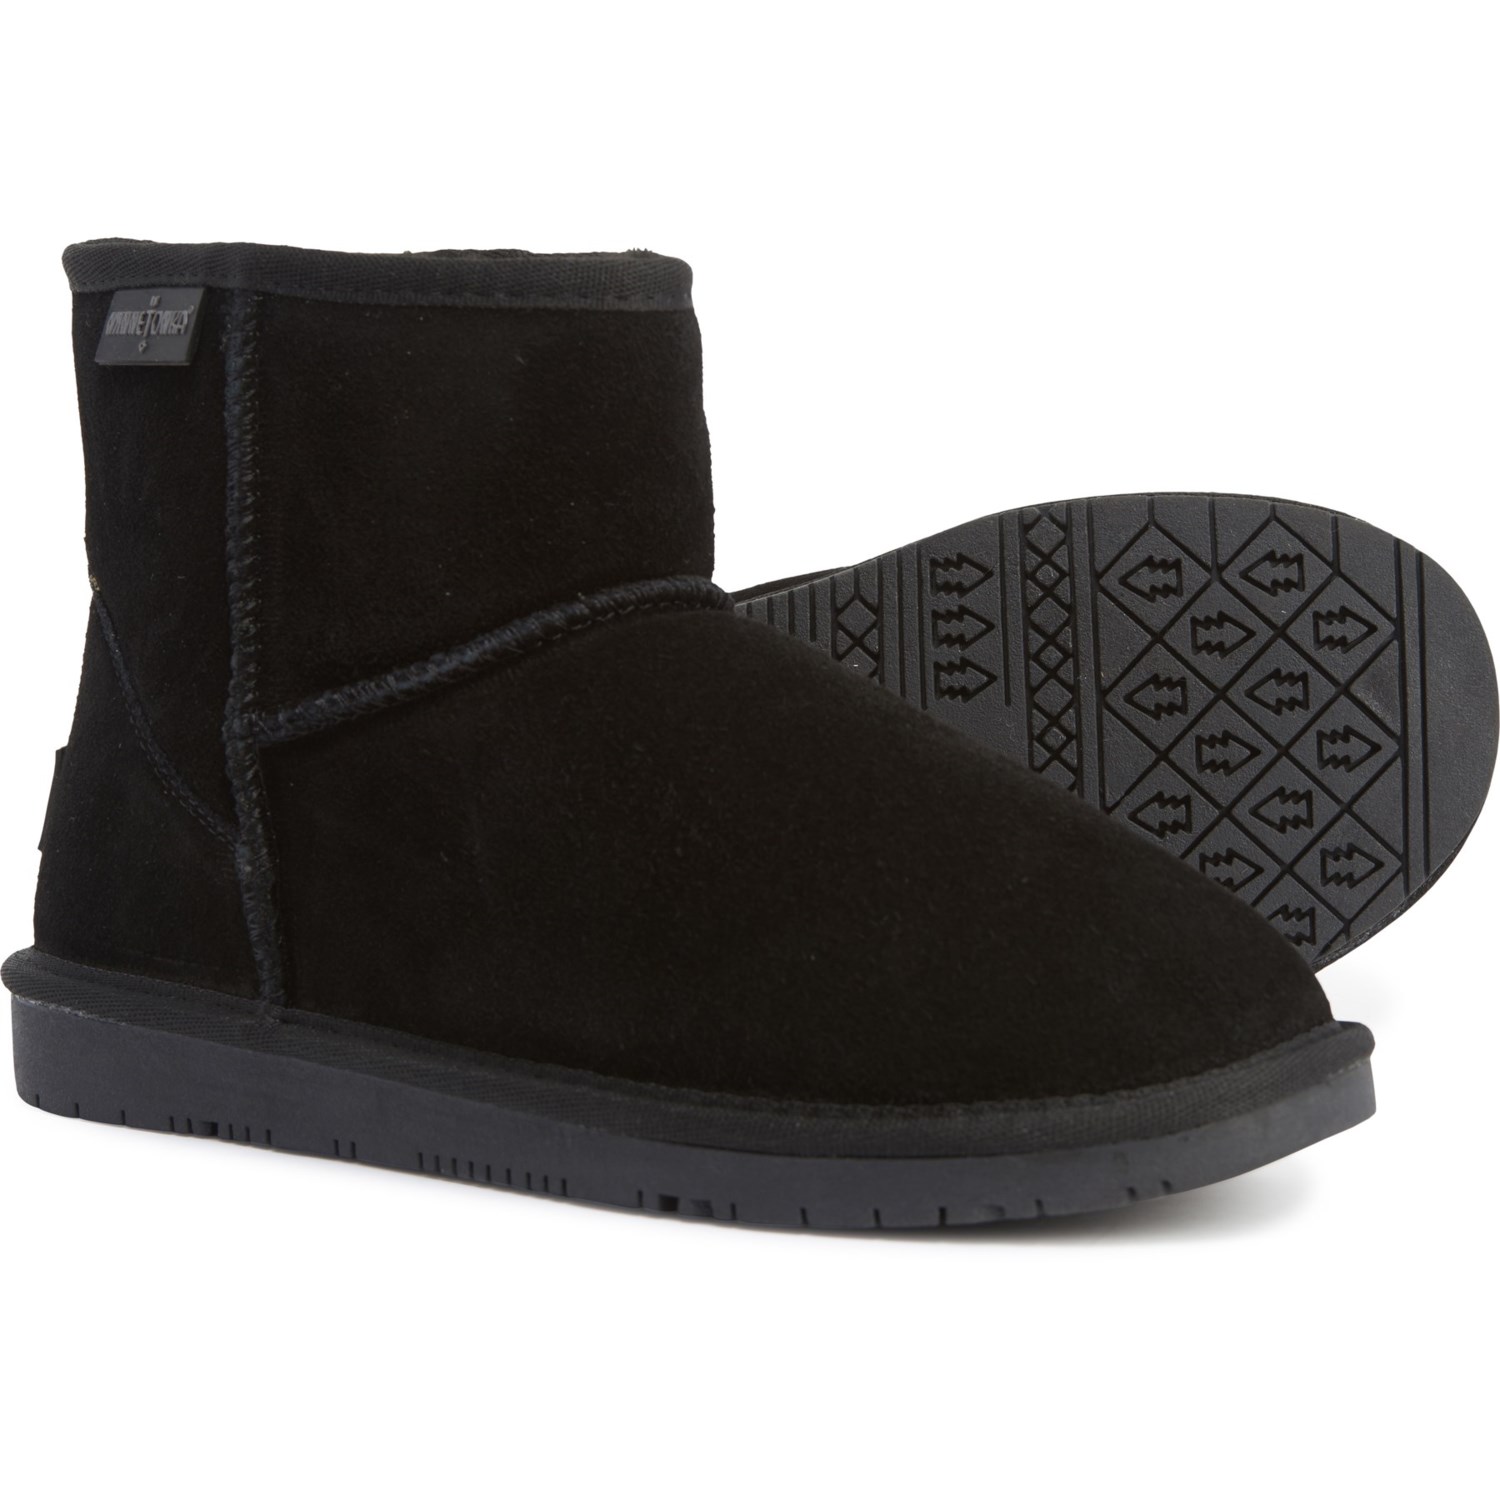 suede shearling boots